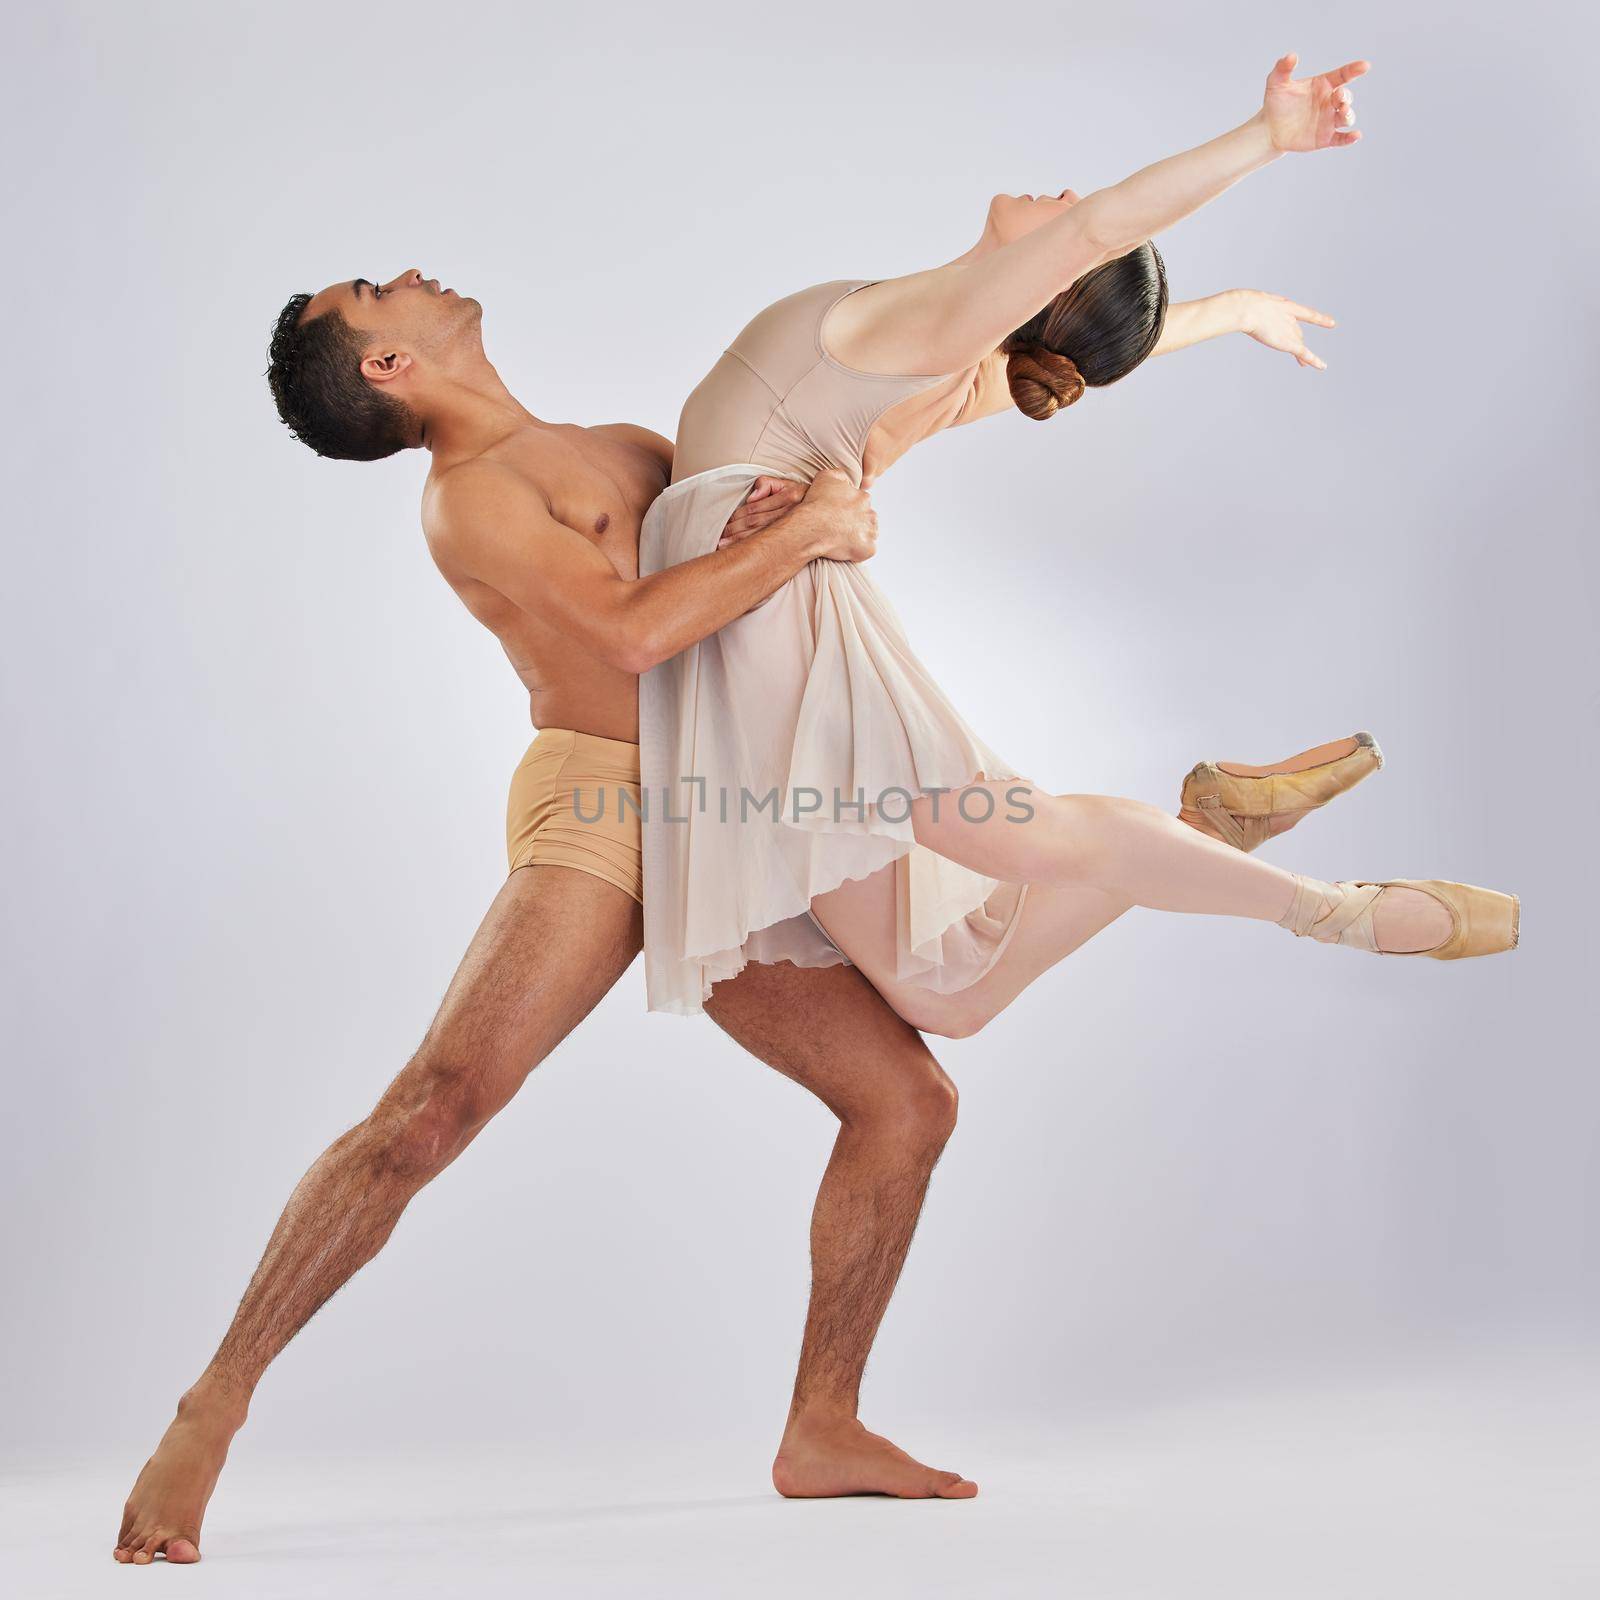 The heart just wants to dance. Studio shot of a young man and woman performing a ballet recital against a grey background. by YuriArcurs